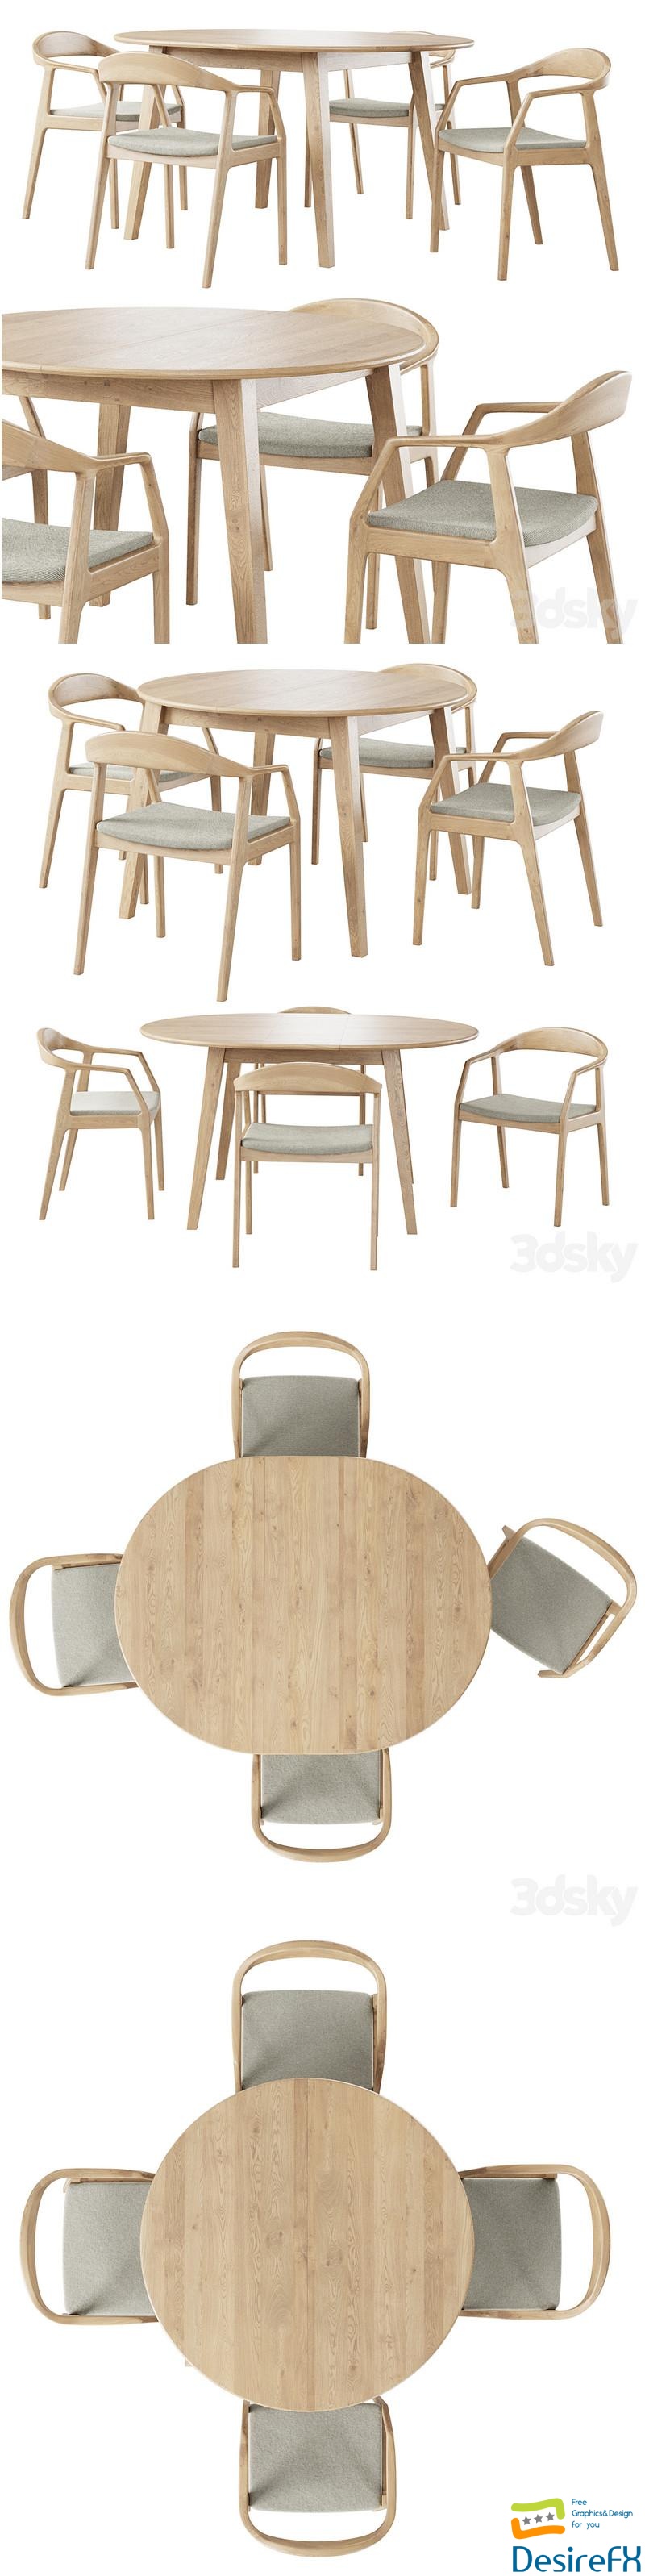 Table Stockholm Chair Sapporo 3D Model